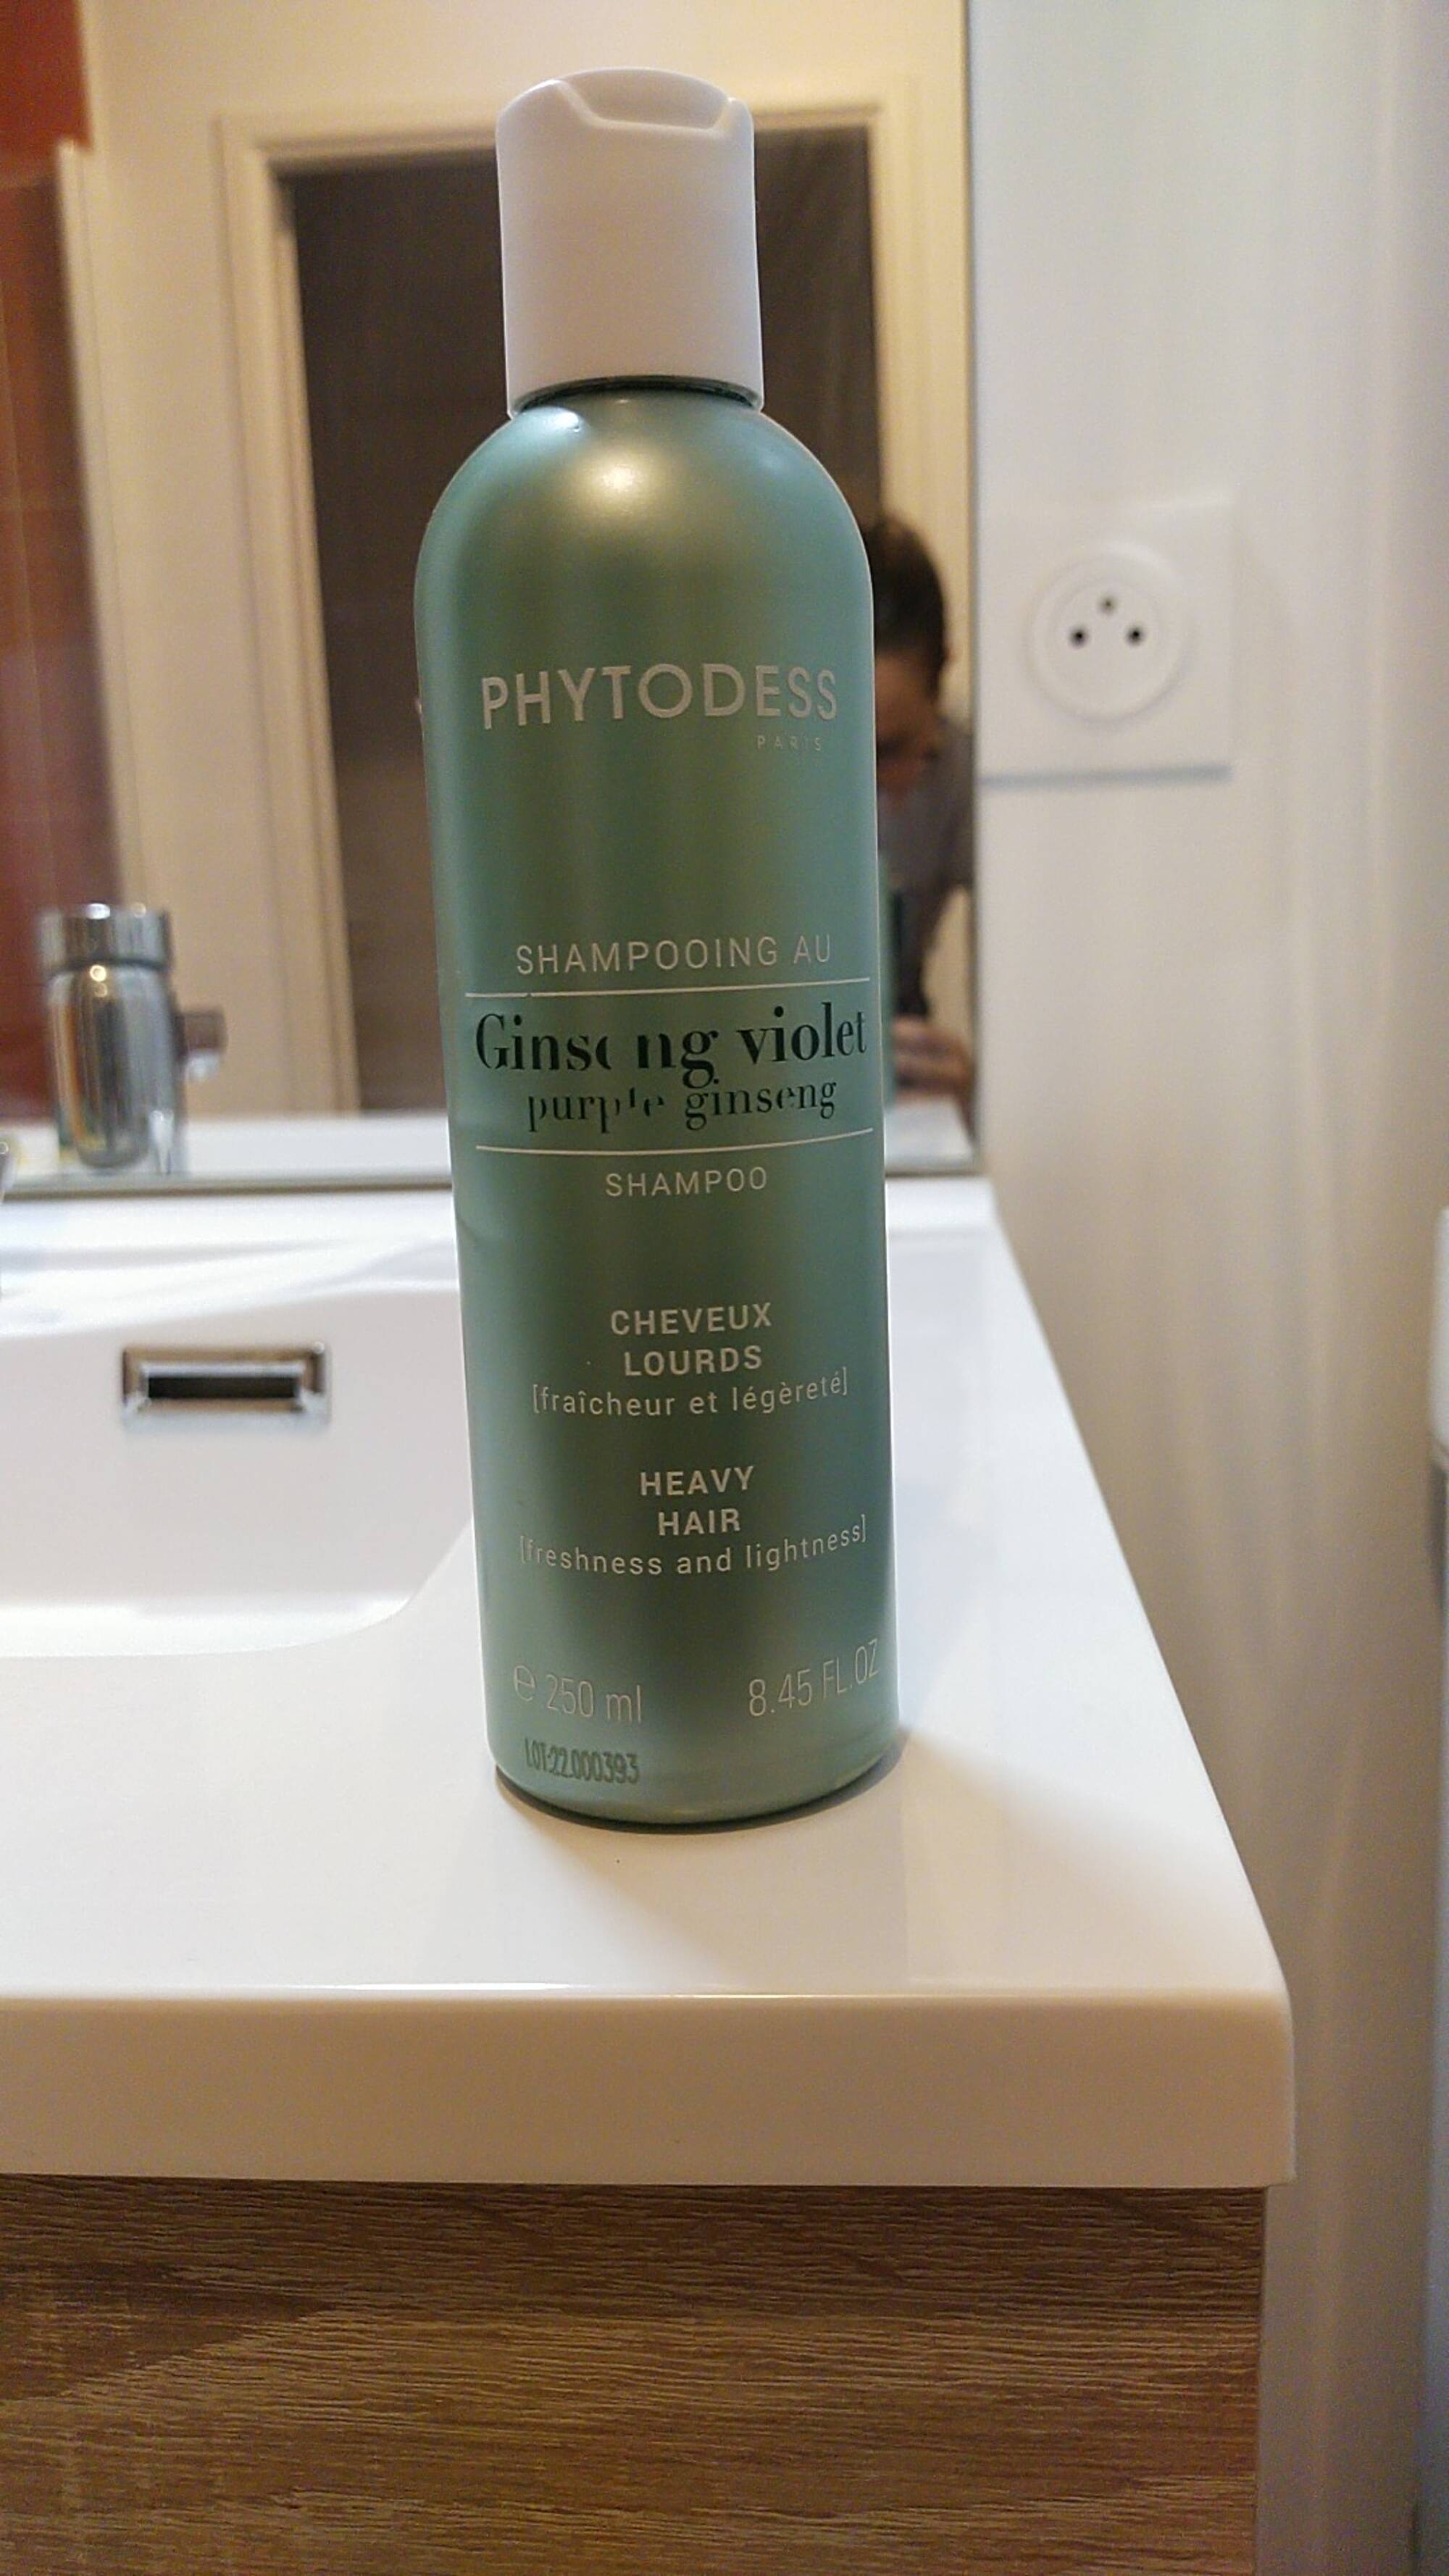 PHYTODESS - Shampooing au ginseng violet cheveux lourds